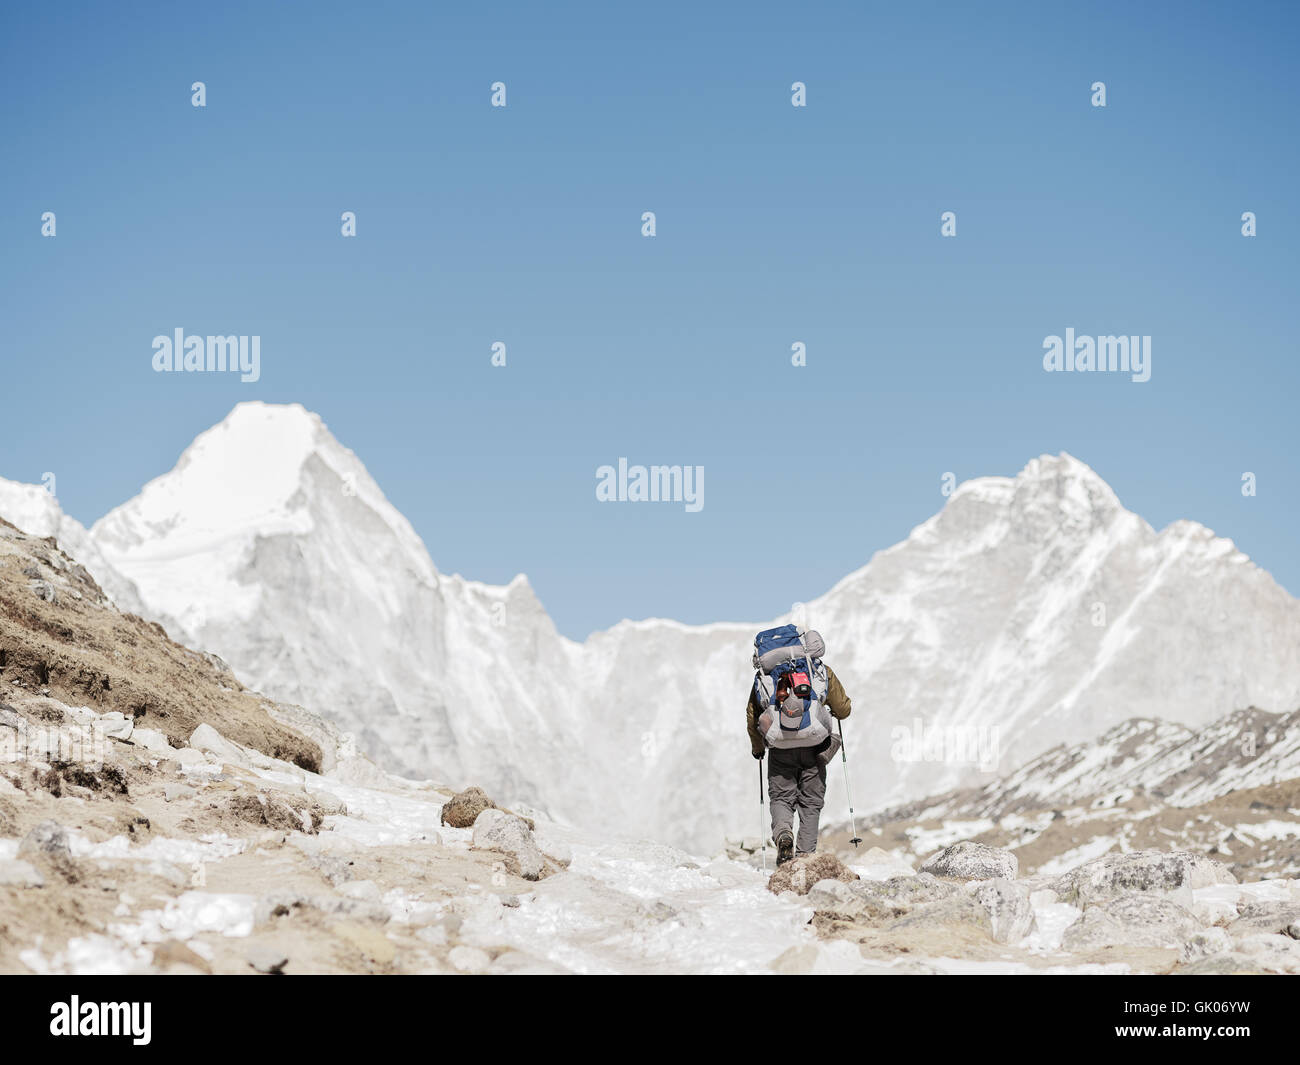 A hikers makes his way through the snow covered Himalayas on his Everest Base Camp journey Stock Photo